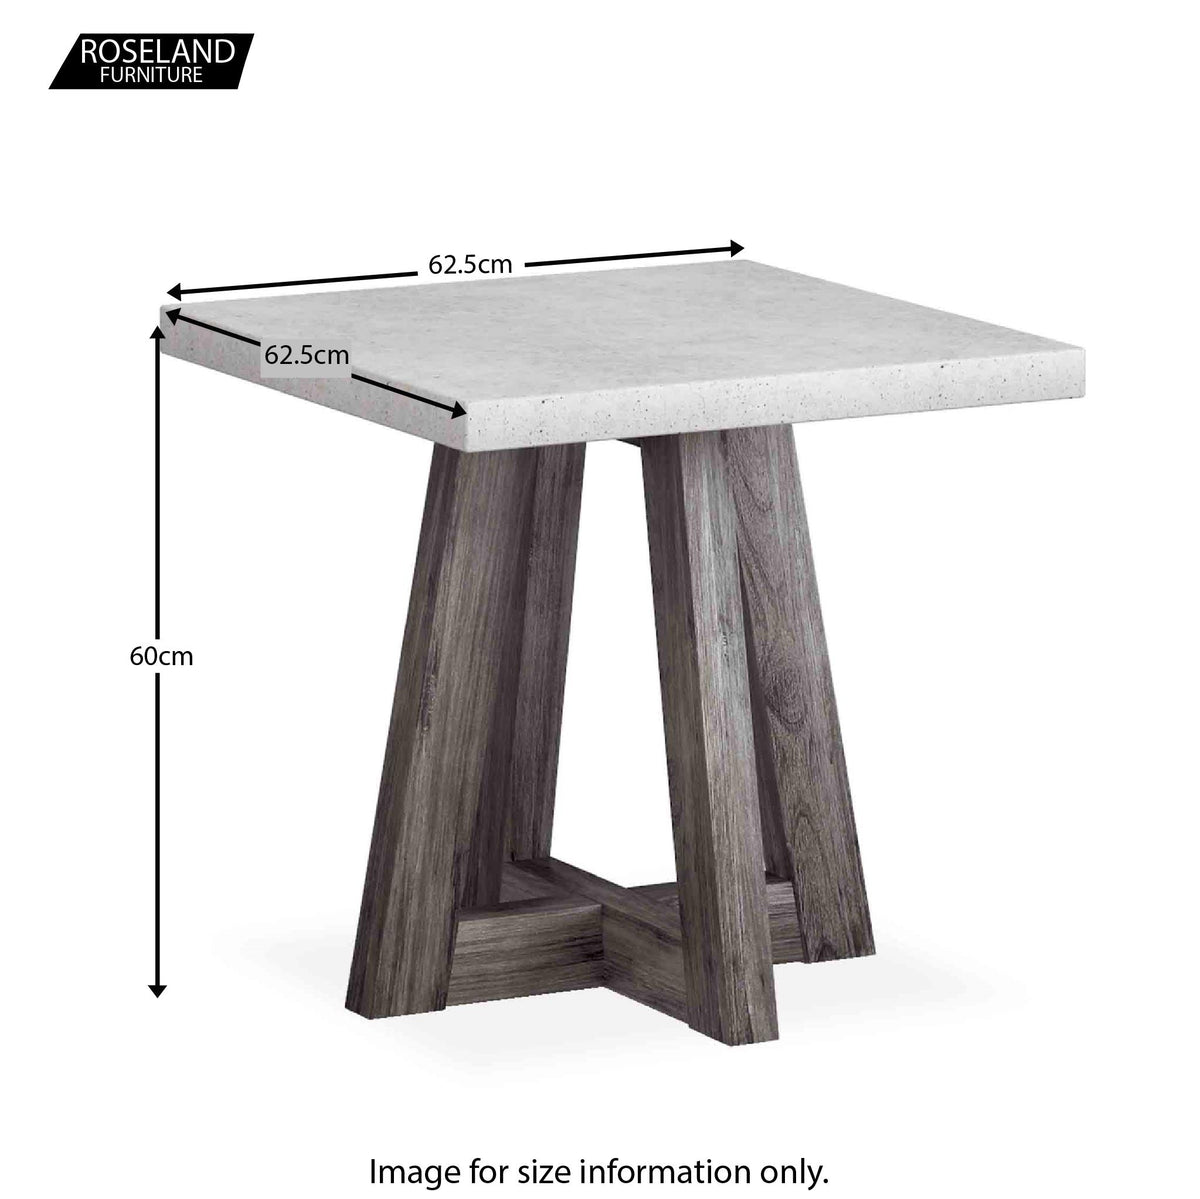 Saltaire Lamp Table - Size Guide